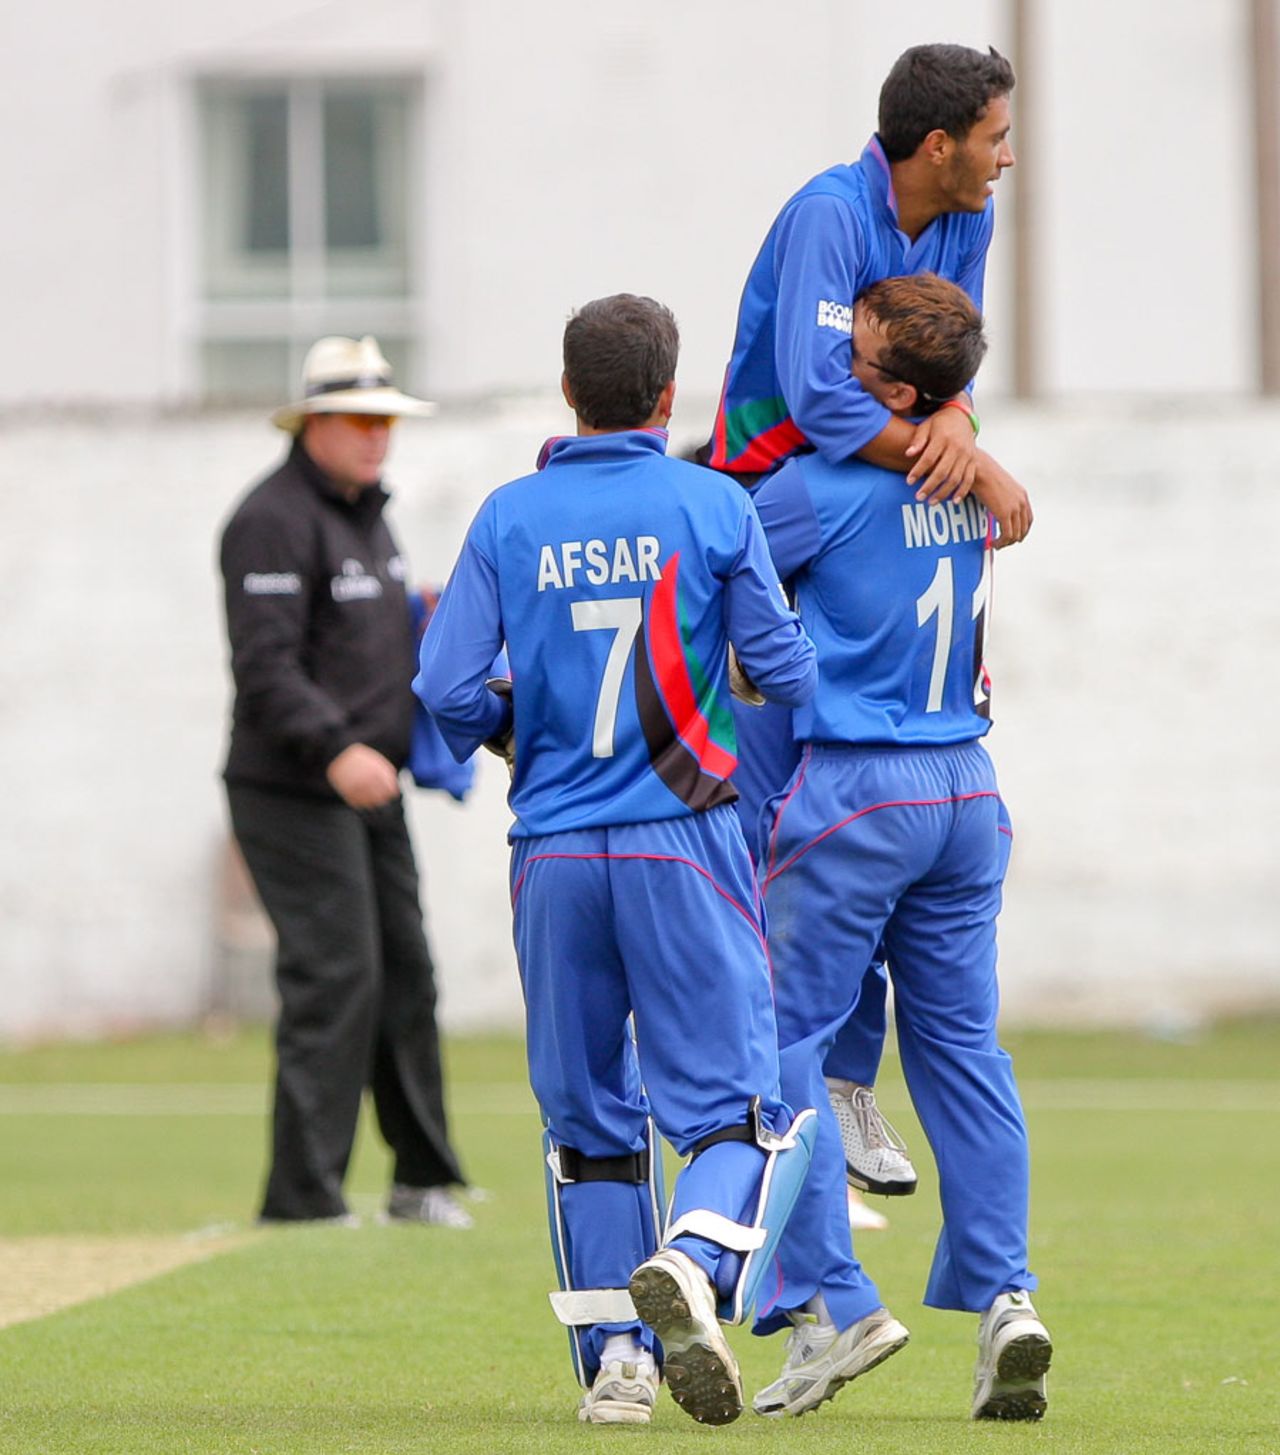 Afghanistan surged to their first win in the tournament, Afghanistan U-19s v Papua New Guinea U-19s, Dublin, July 31, 2011